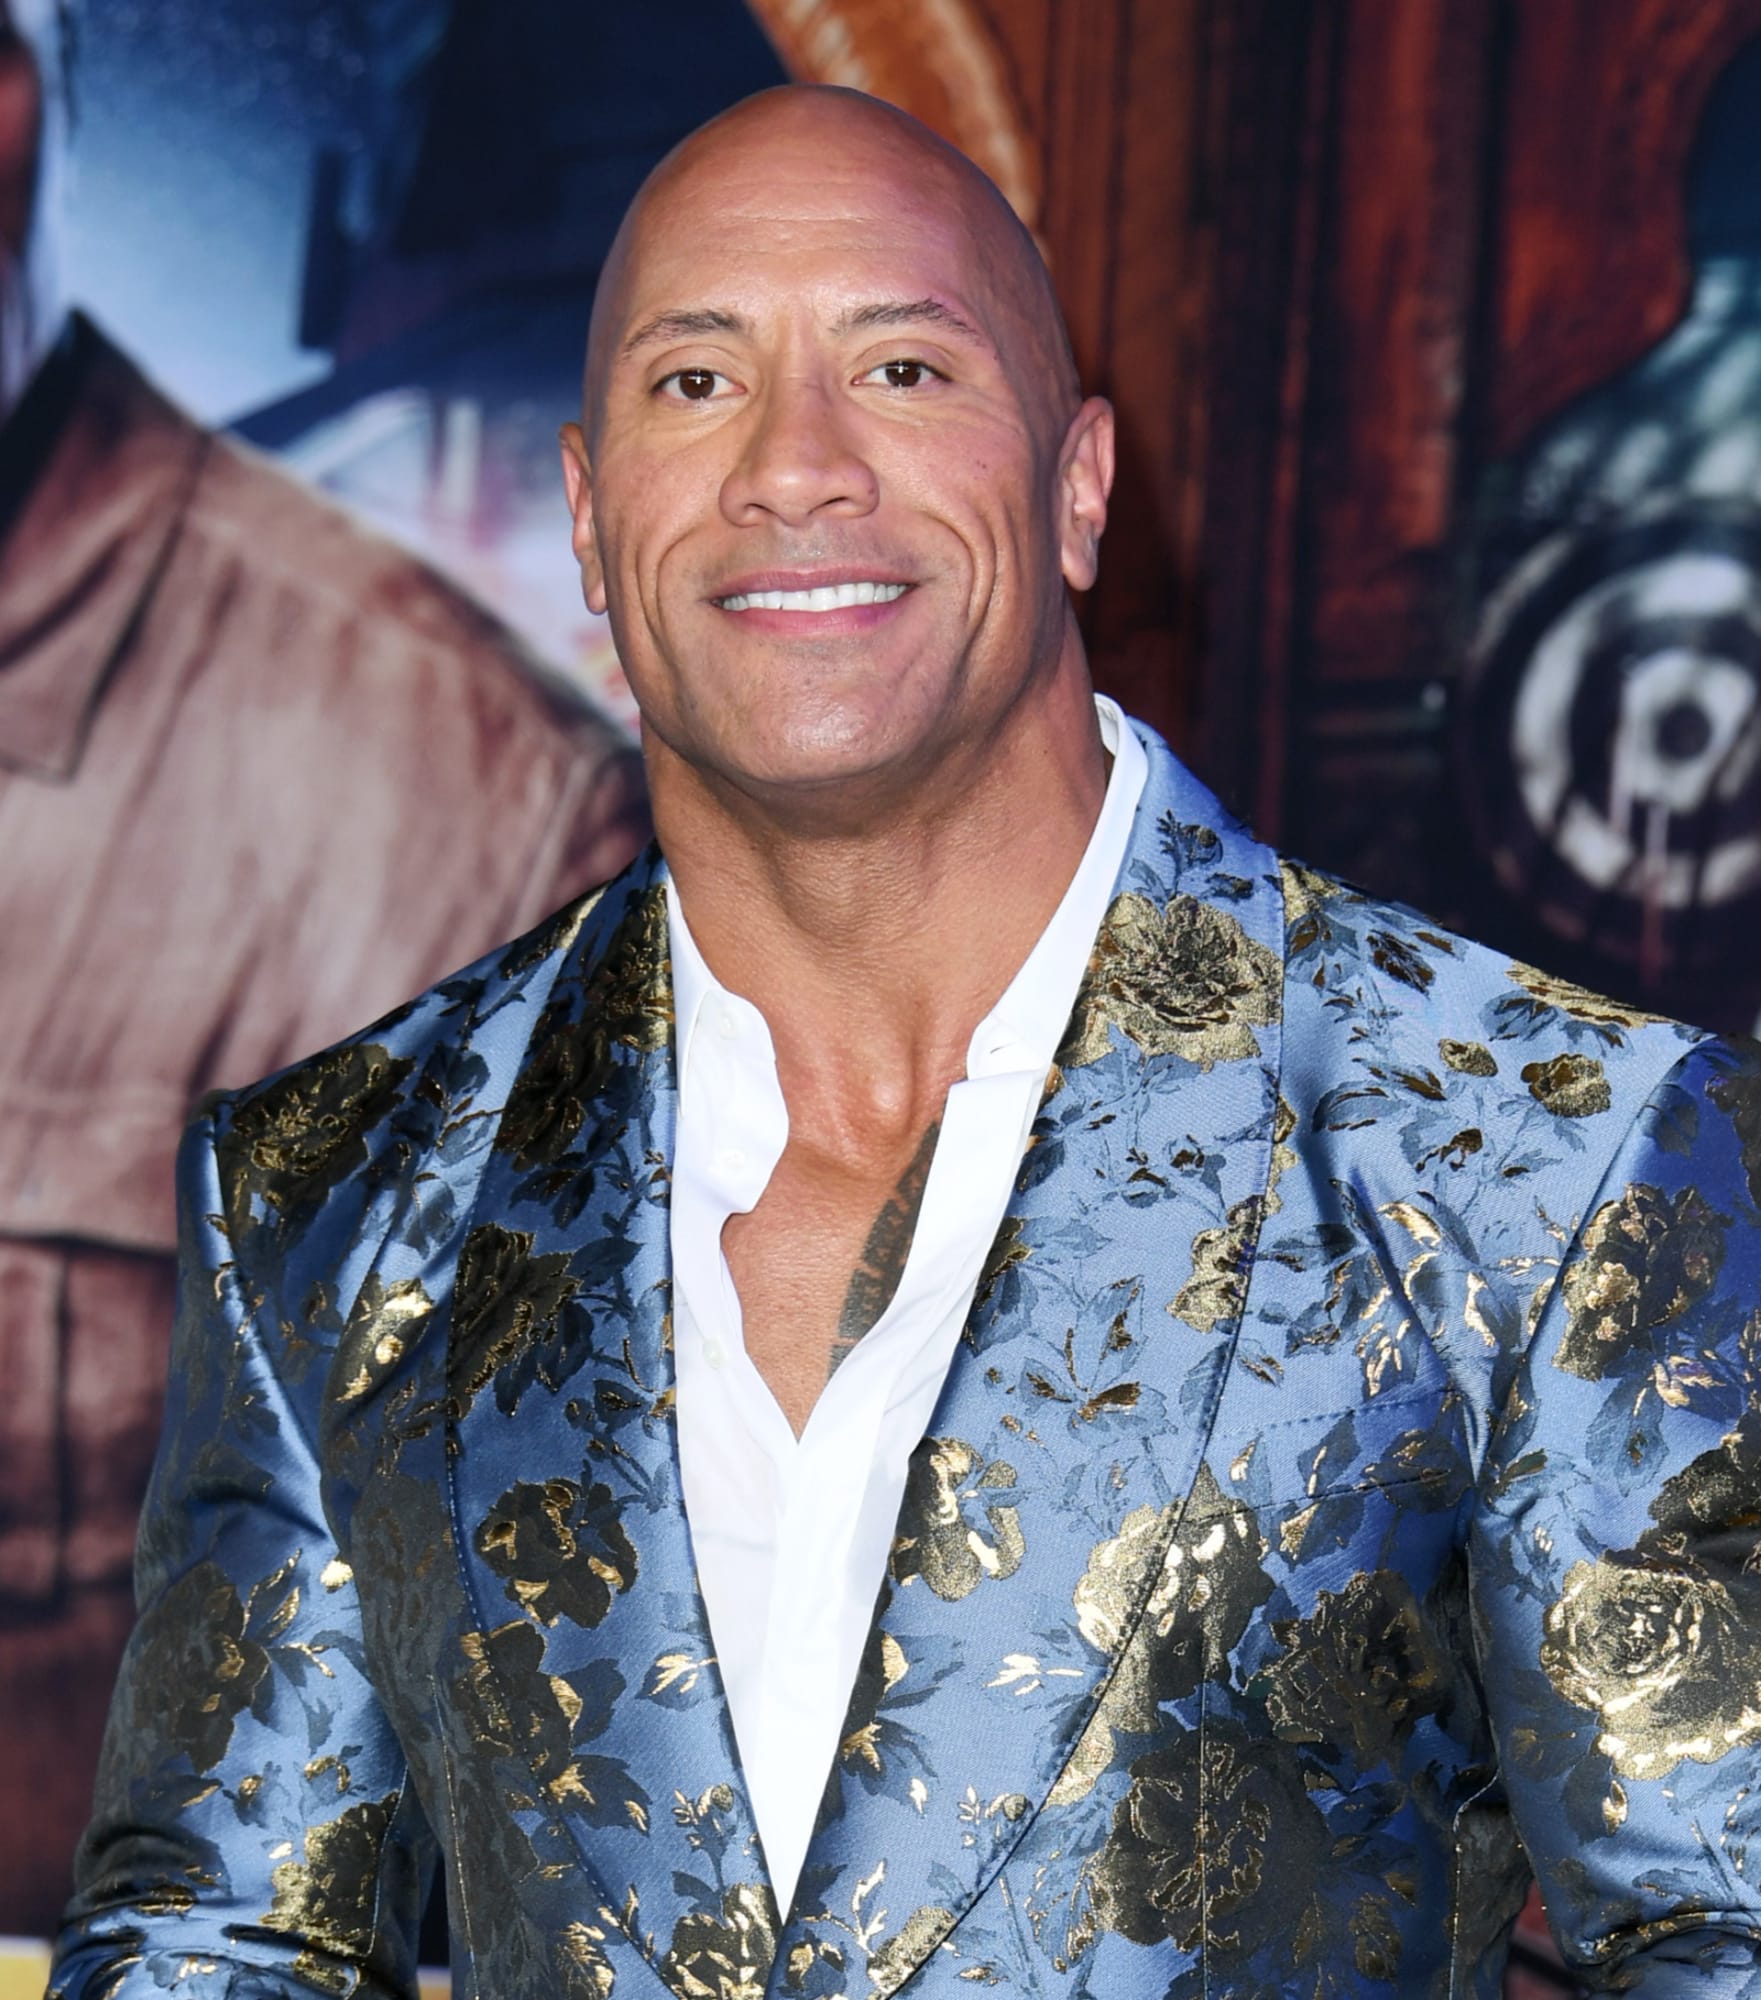 Dwayne The Rock Johnson Is Absolutely Rocking The Black Adam Suit 1090